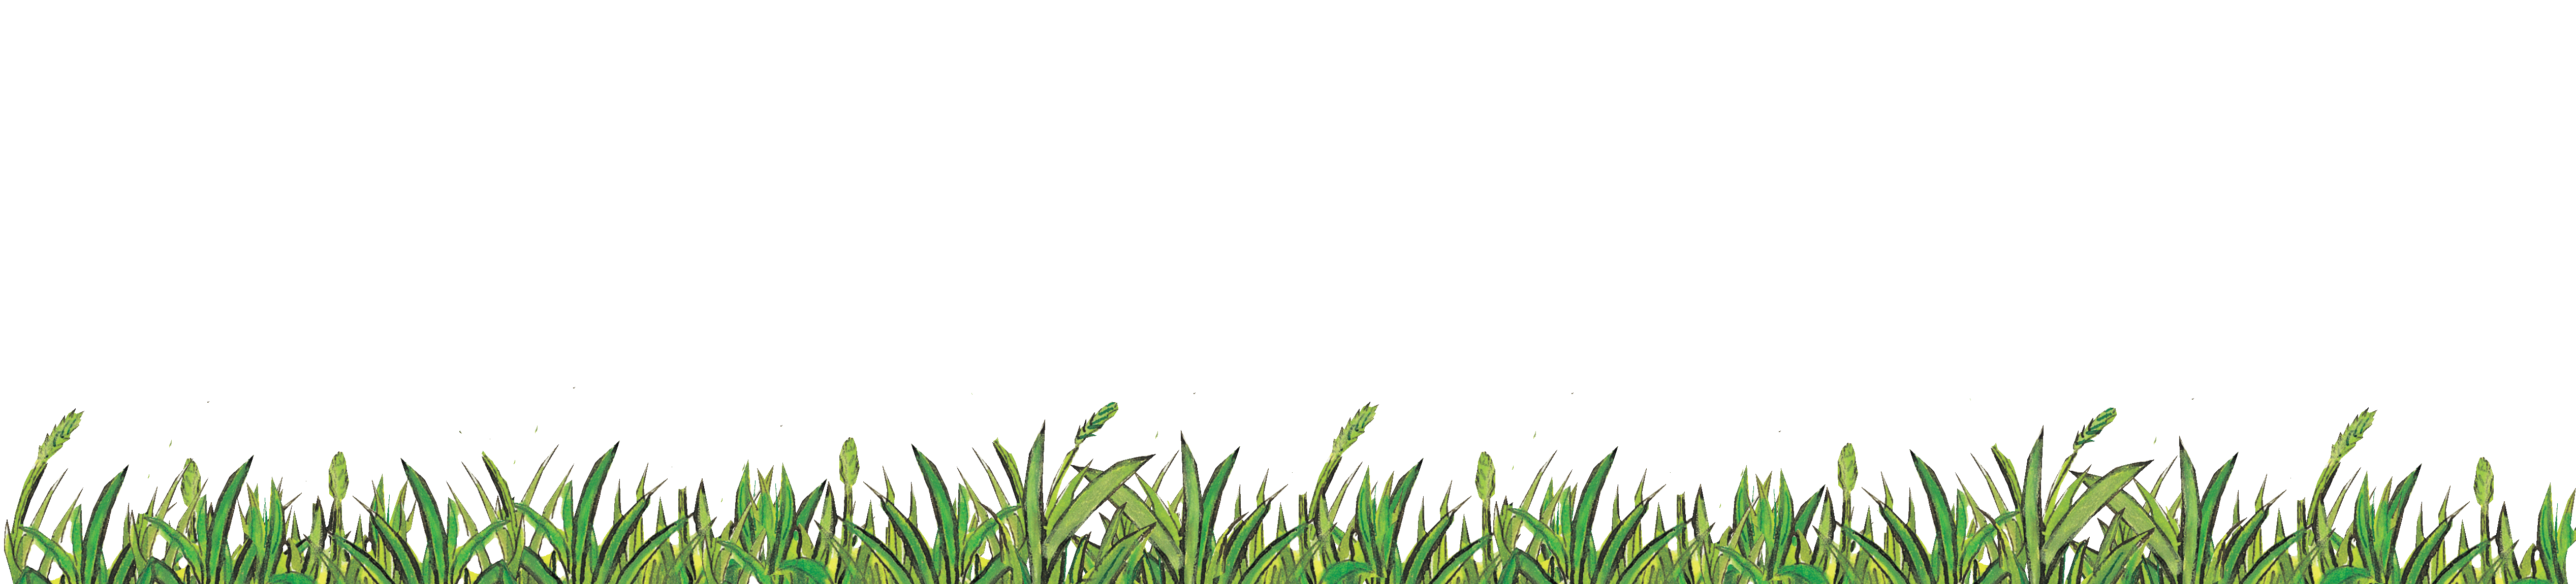 grassfooter